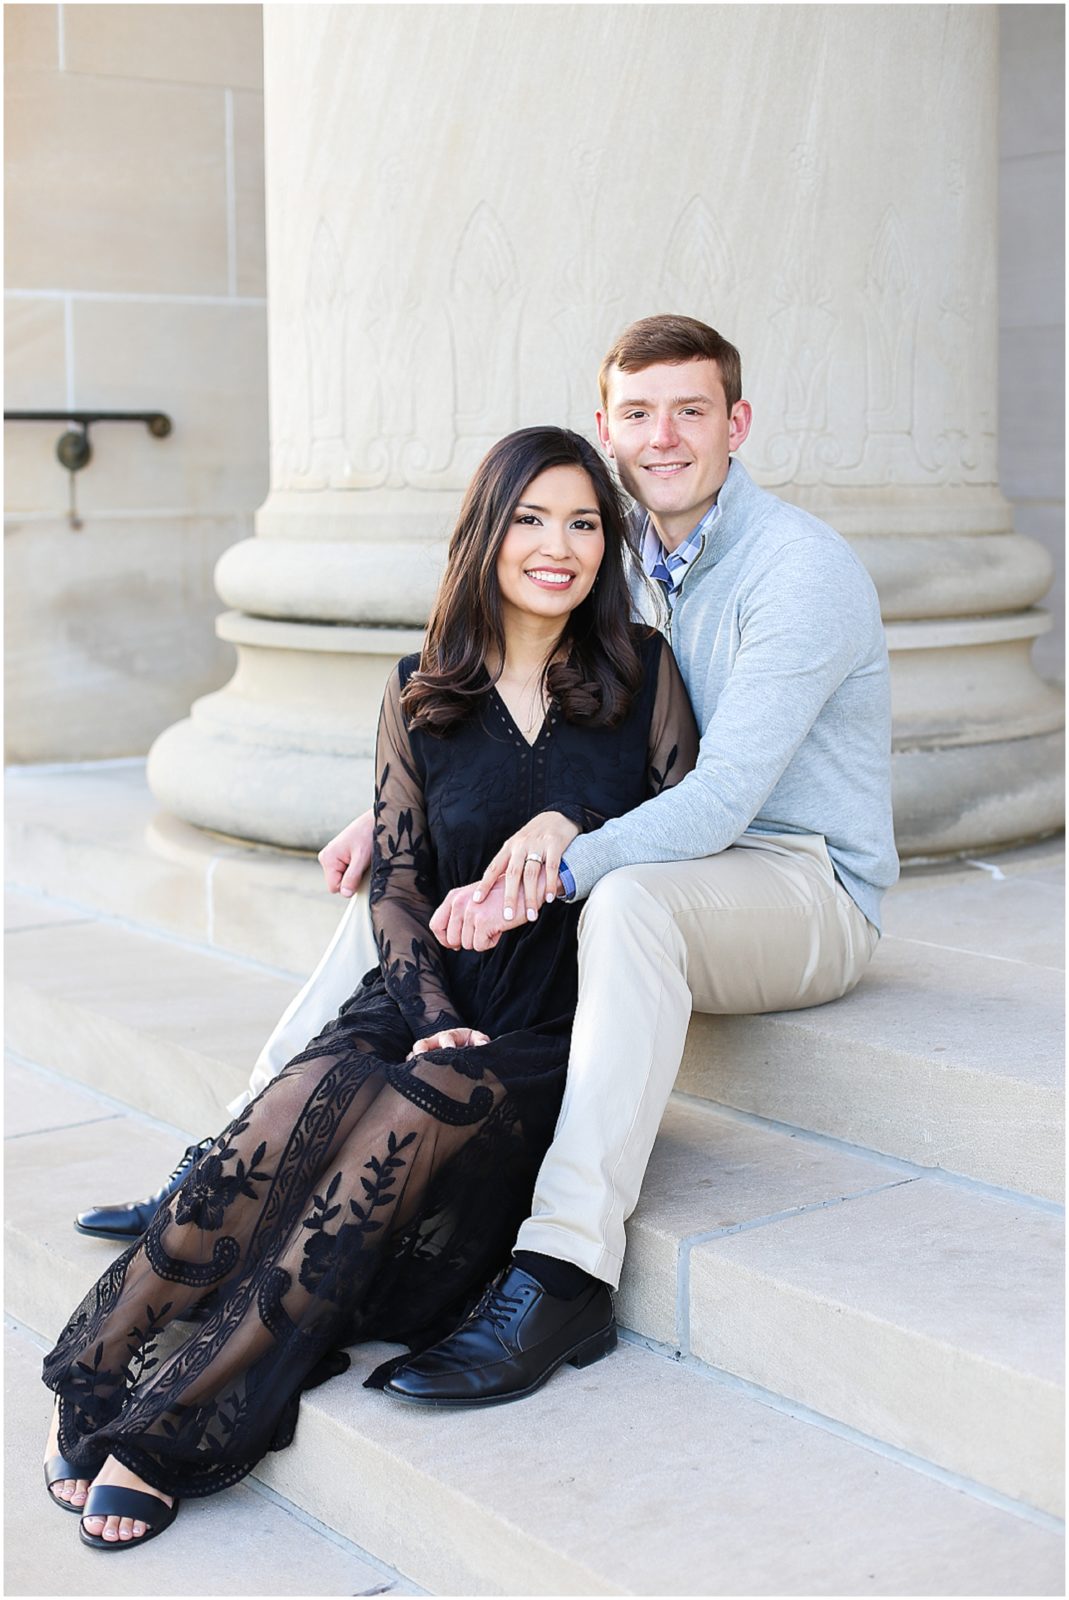 Engagement session at the nelson atkins museum - engagement photography and wedding photographer